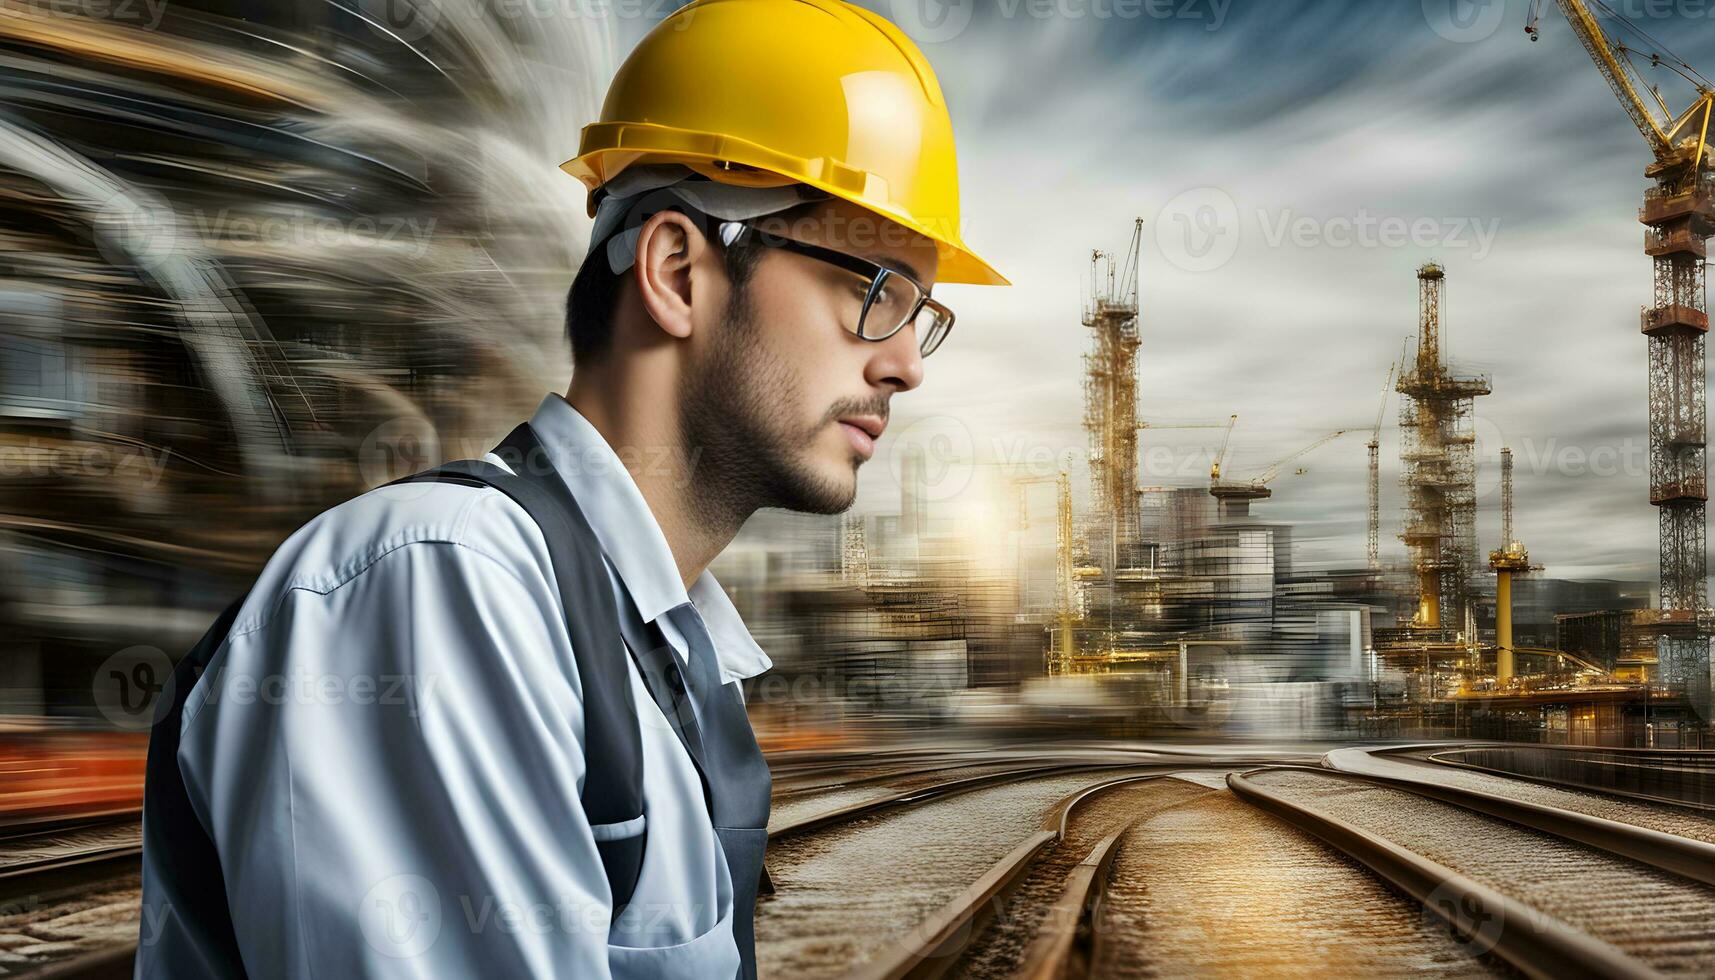 AI generated a man in a hard hat and glasses standing in front of a train track photo